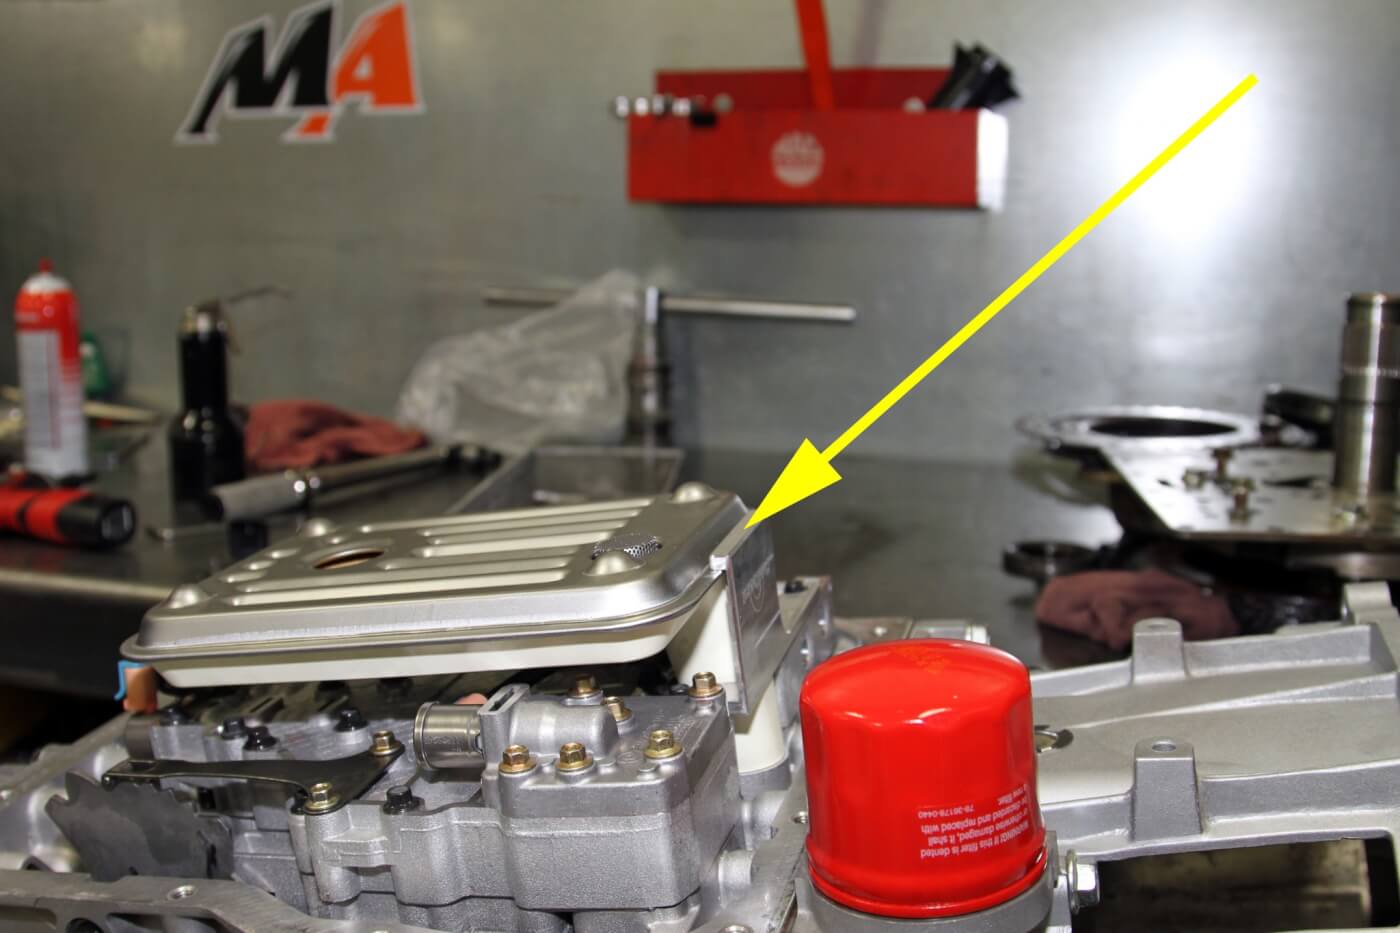 31. Since they use an Allison deep transmission pan and filter on the MA450 transmission builds, the Merchant Automotive crew also use a Sun Coast machined retainer (see arrow) to hold the filter securely in place and prevent it from falling off and causing the pump to suck air and damage the transmission.